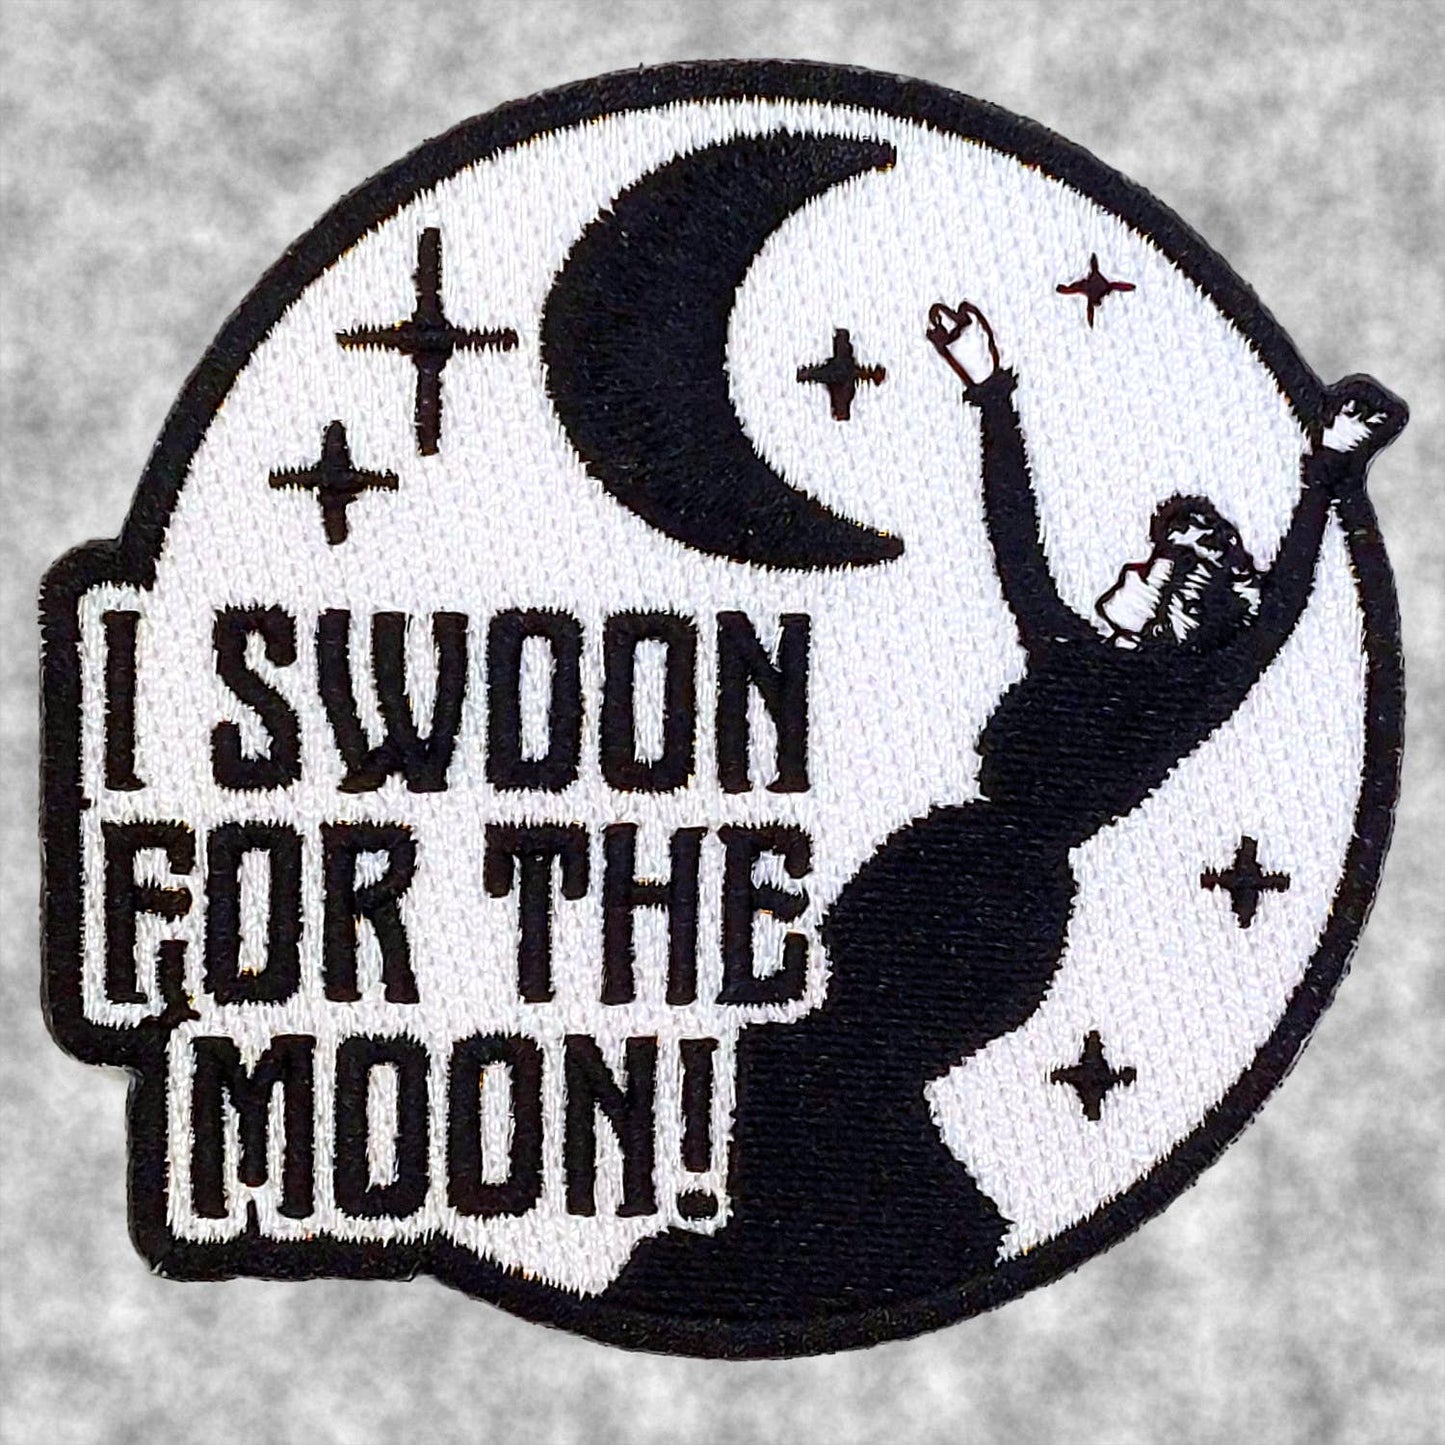 "I Swoon for the Moon" Embroidered Patch